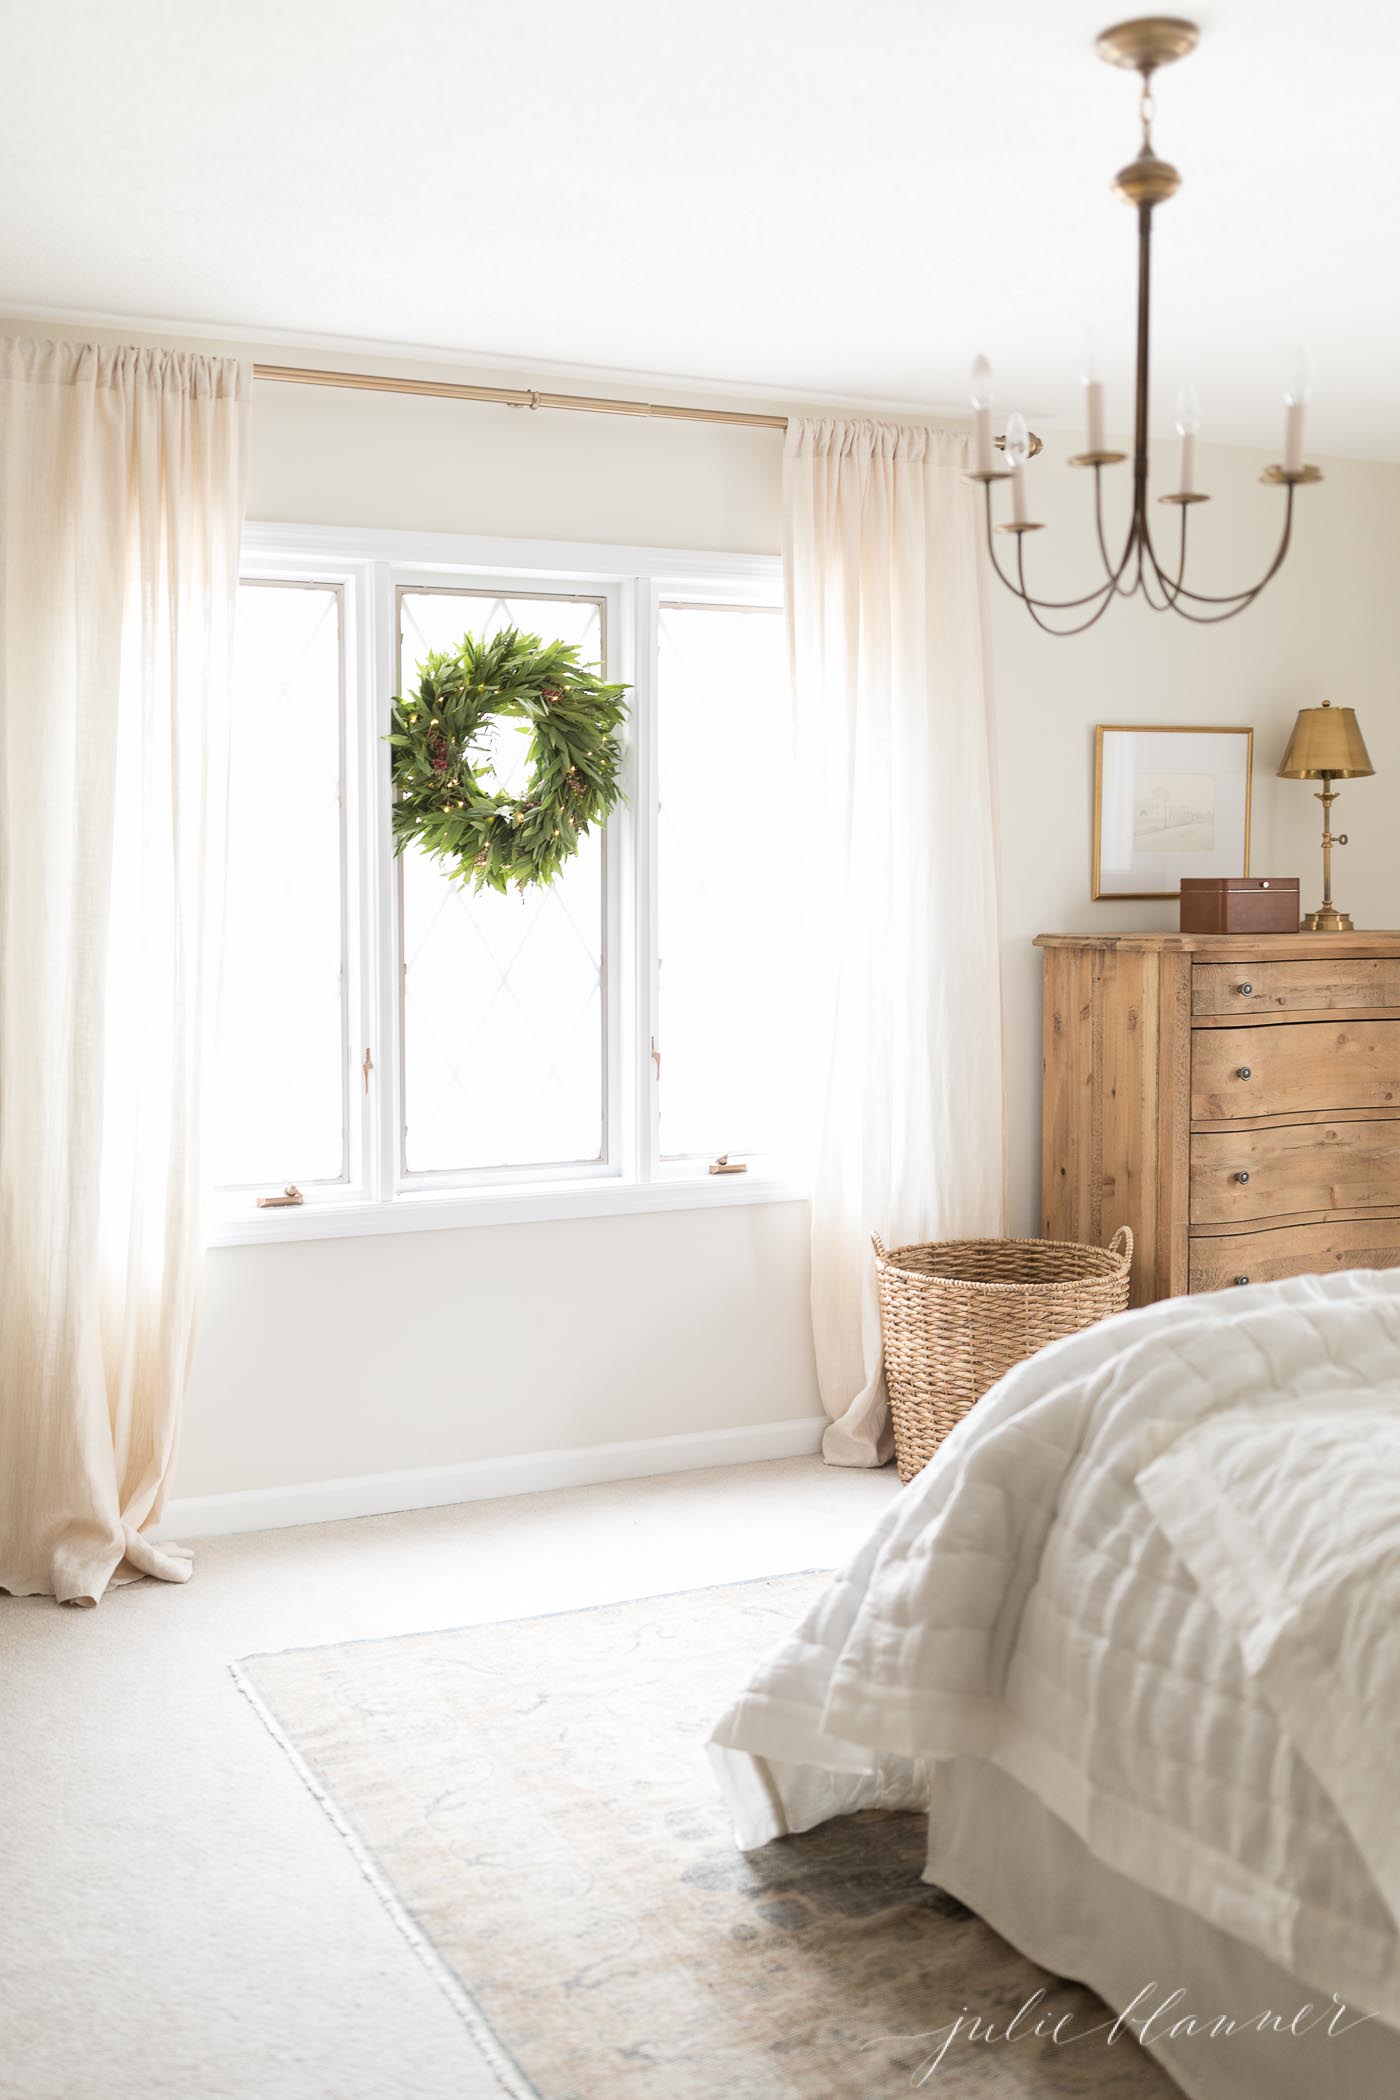 wreath in window of a white bedroom in a neutral home.